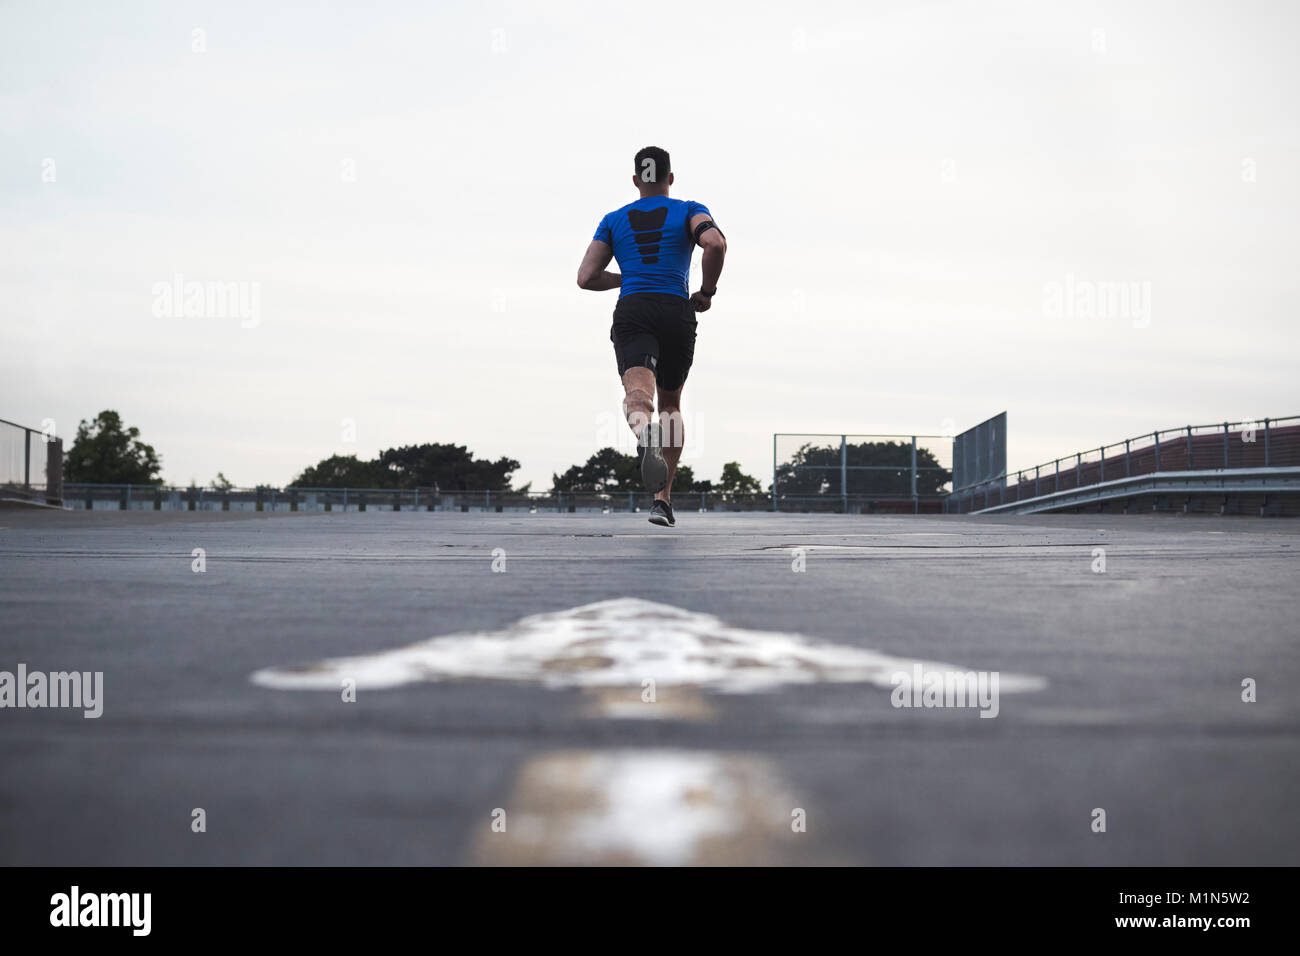 Male athlete running on a road away from camera, full length Stock Photo